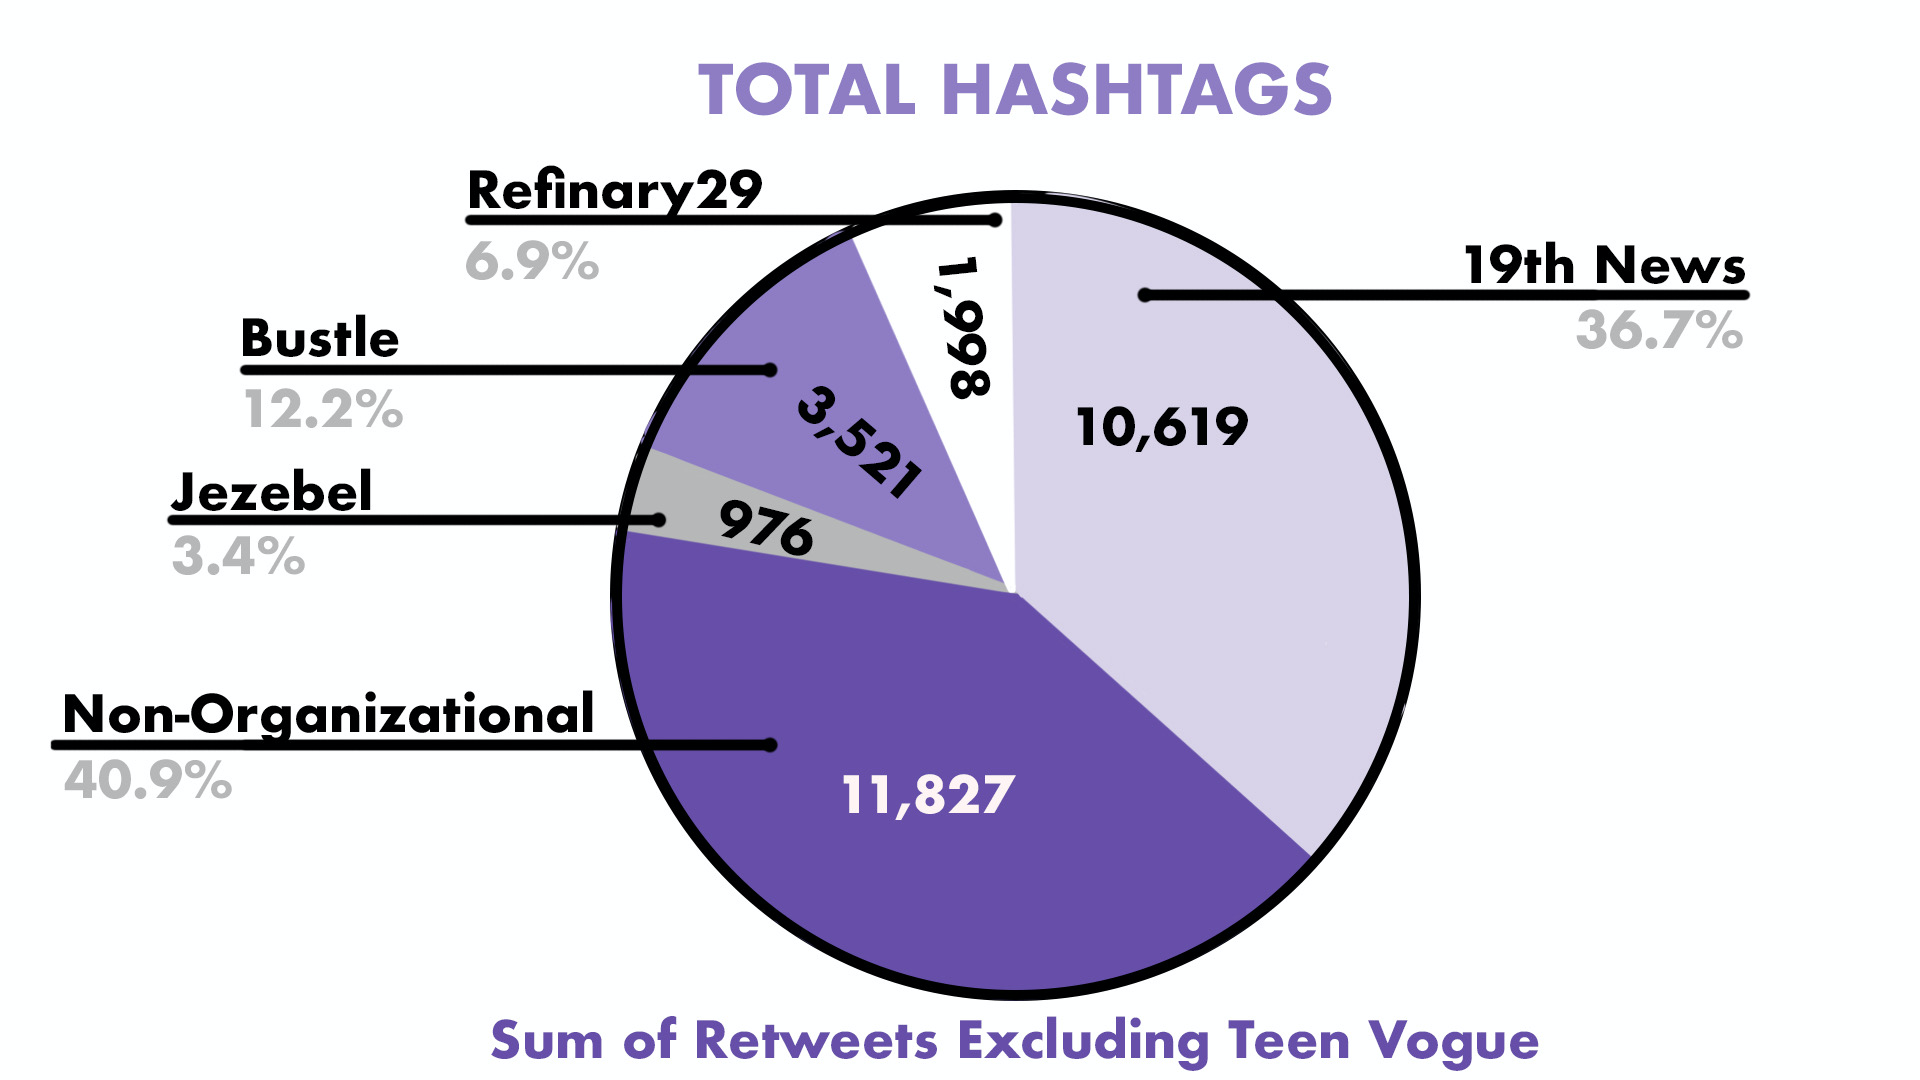 19th News Performs Well On Hashtag Engagement Compared to Its Competitors